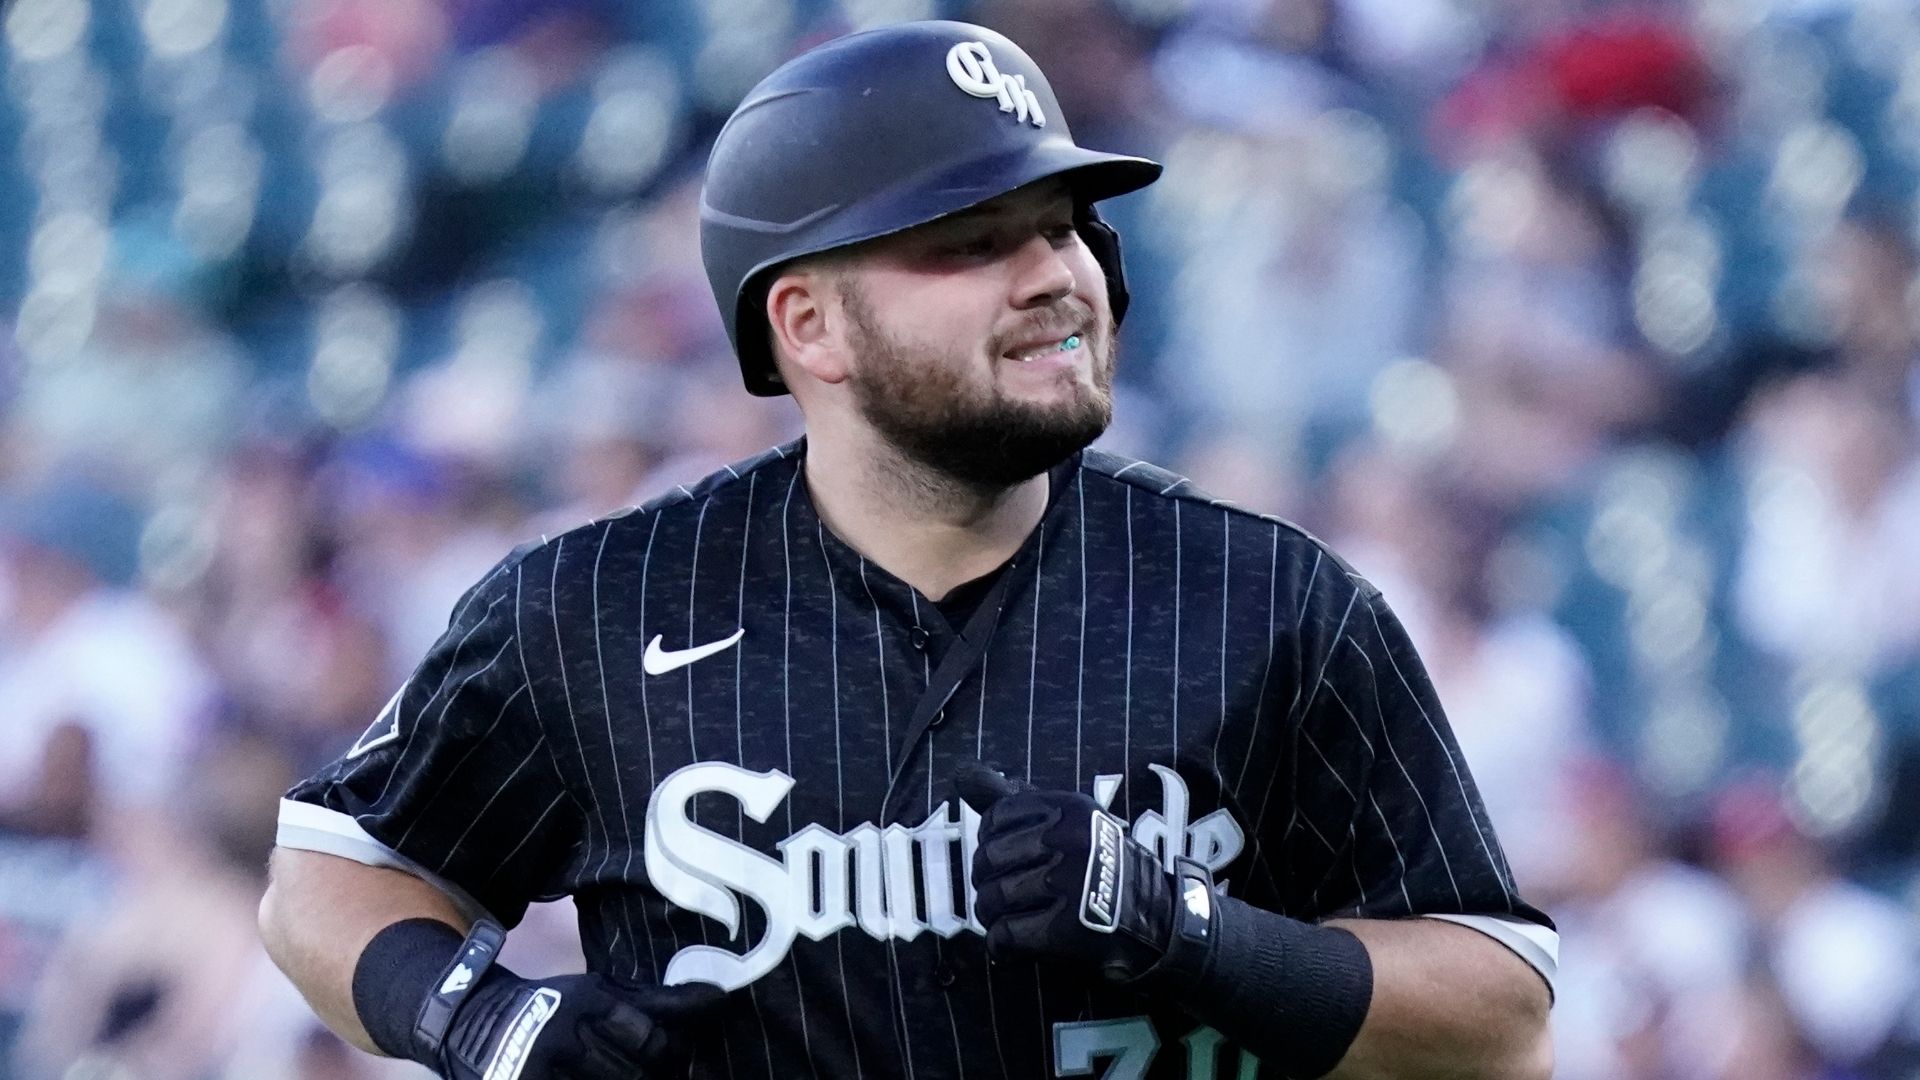 White Sox: Jake Burger might be going to the playoffs after all